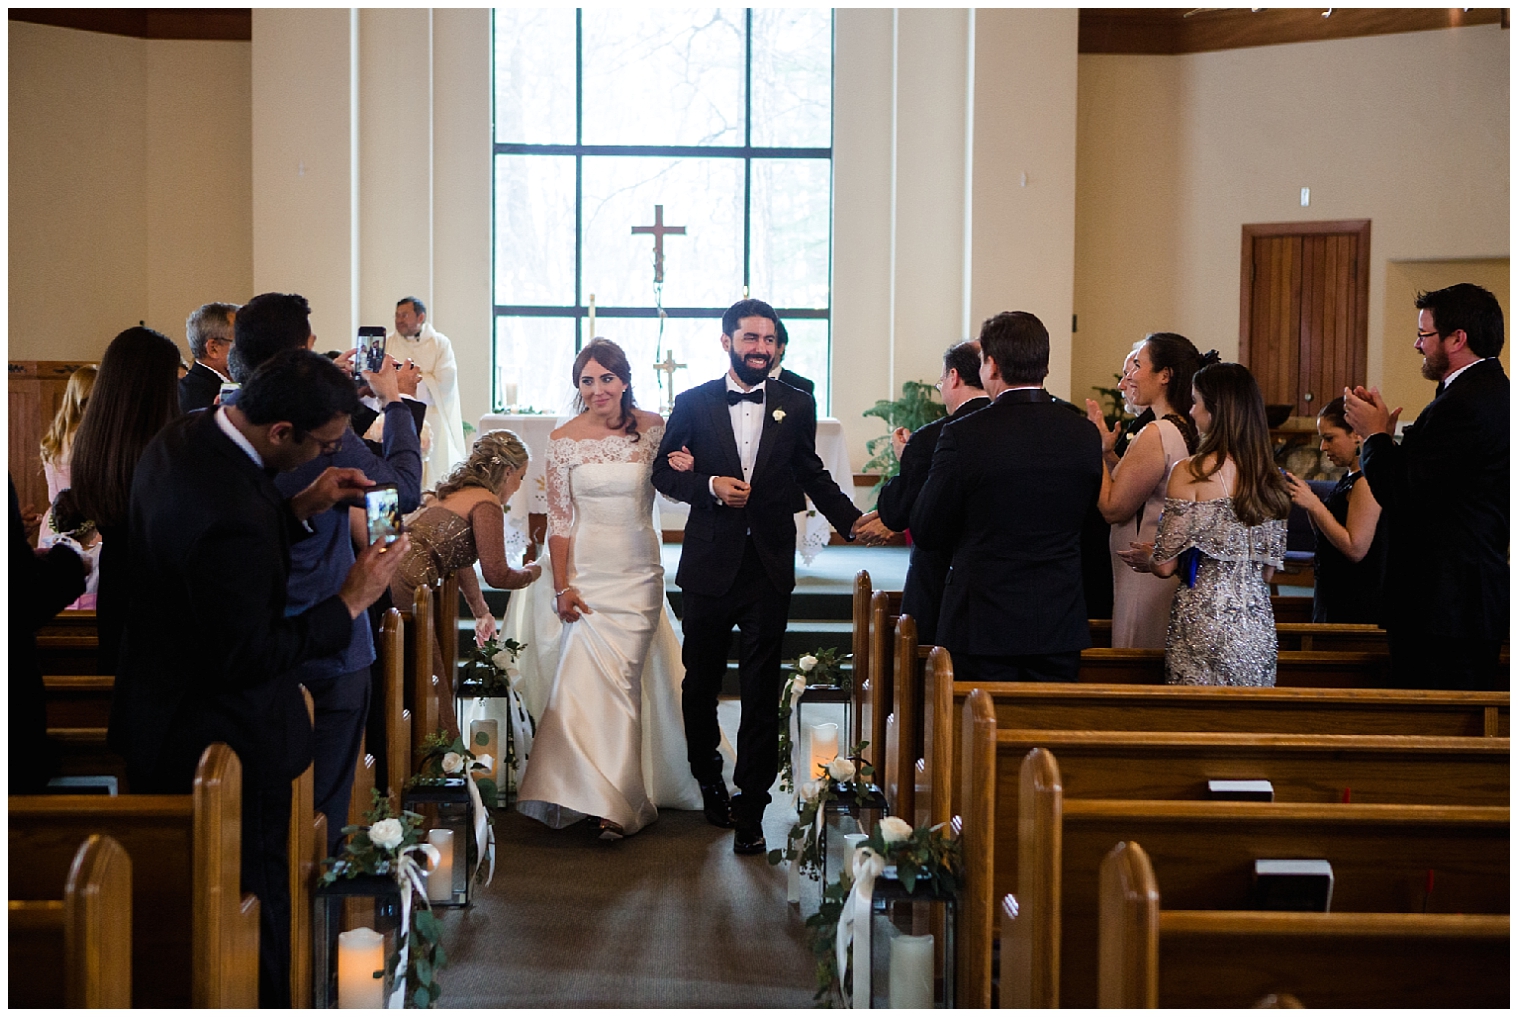 The wedding couple walk back down the aisle together at Beaver Creek Wedding Chapel